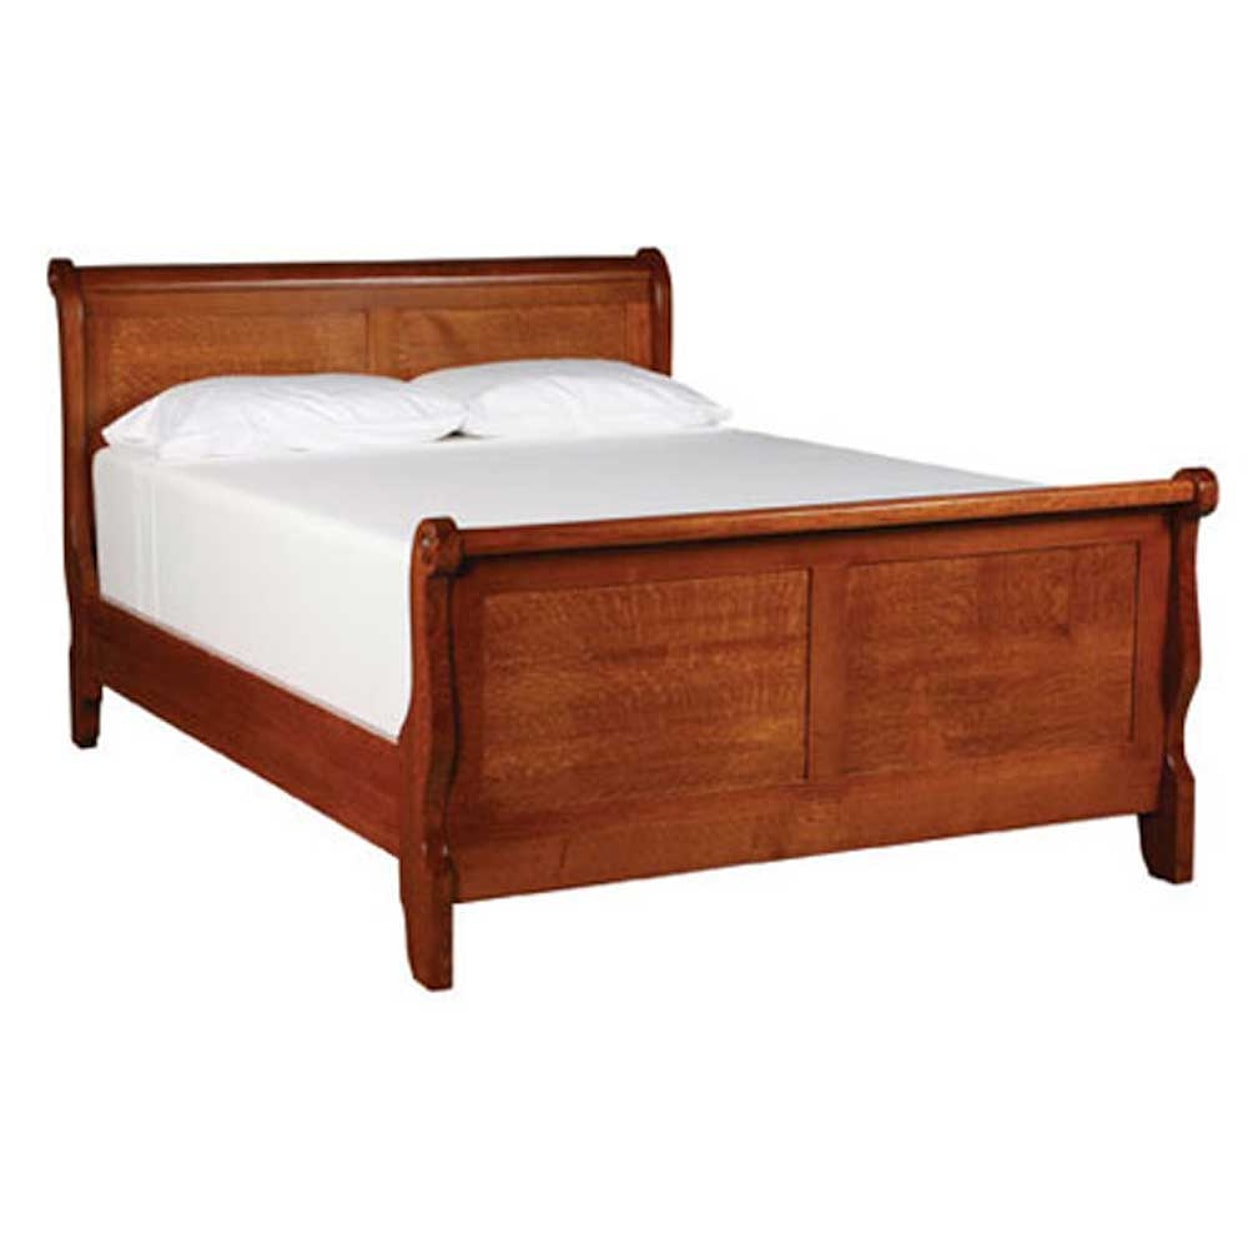 Simply Amish Empire California King Sleigh Bed